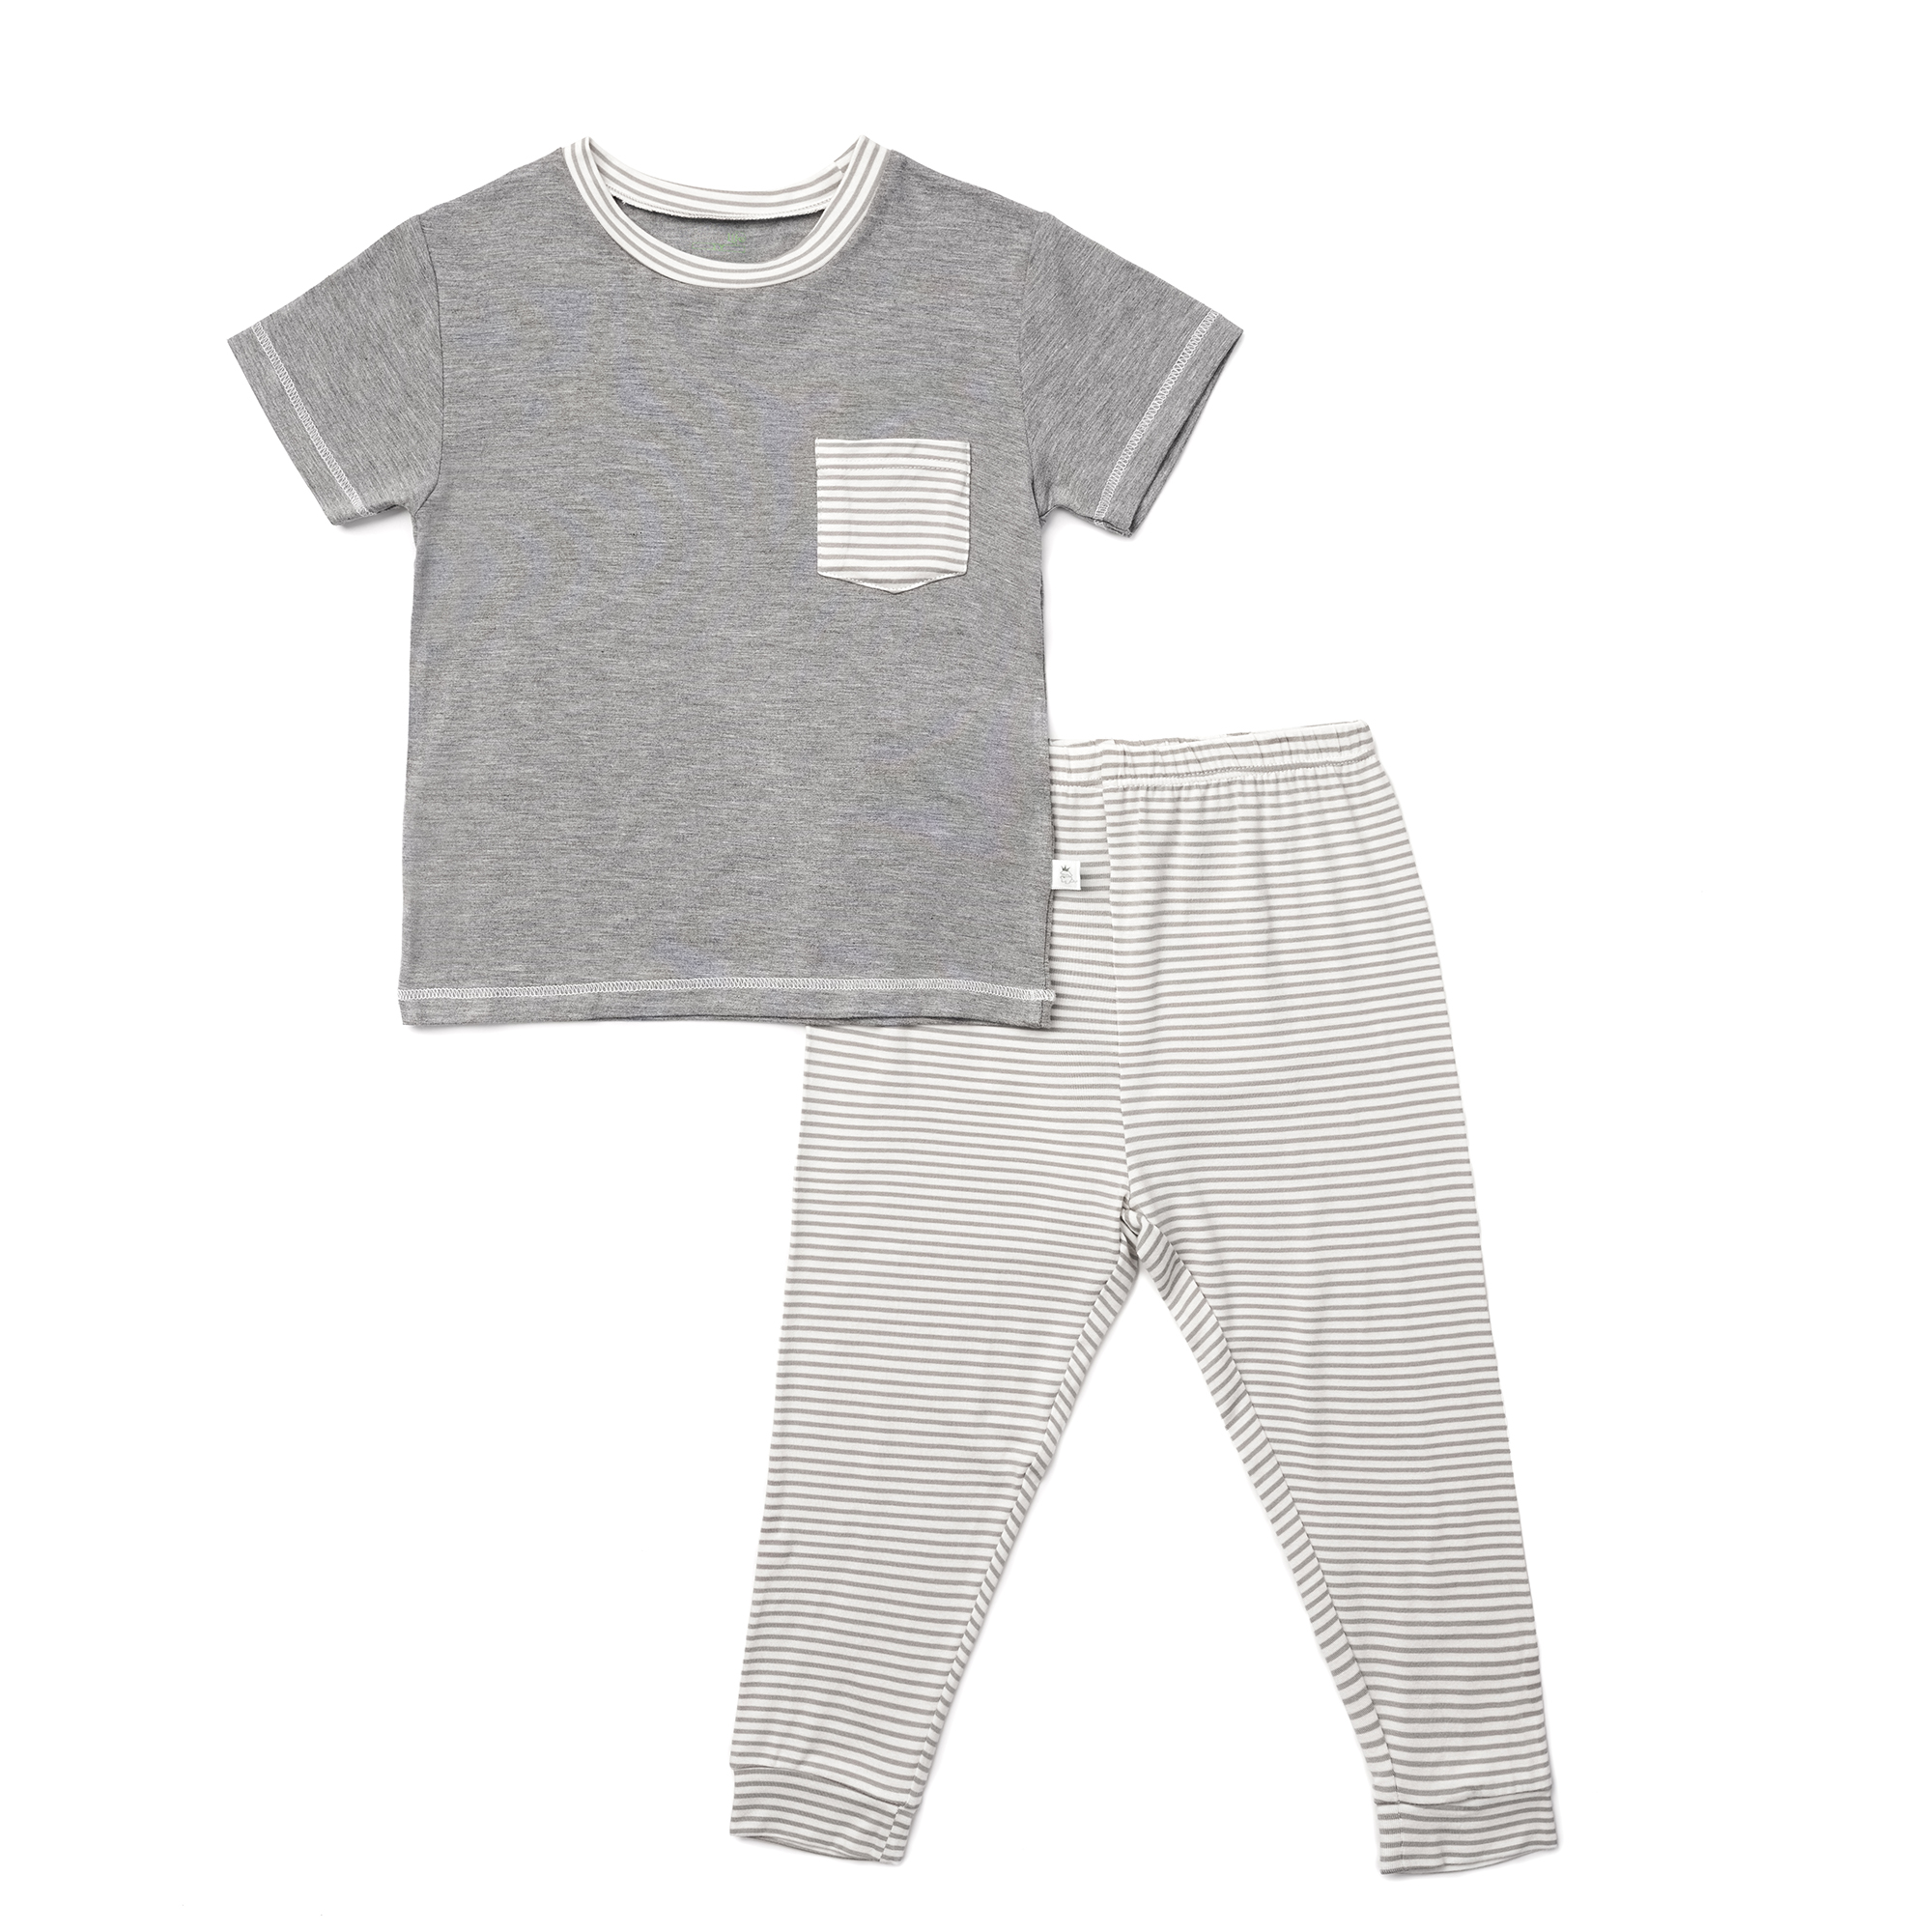 baby-fairSimply Life - Kids Short Sleeve Bamboo Pyjamas Set with Front Pocket and Tapered Cuff Pants, Grey Stripes